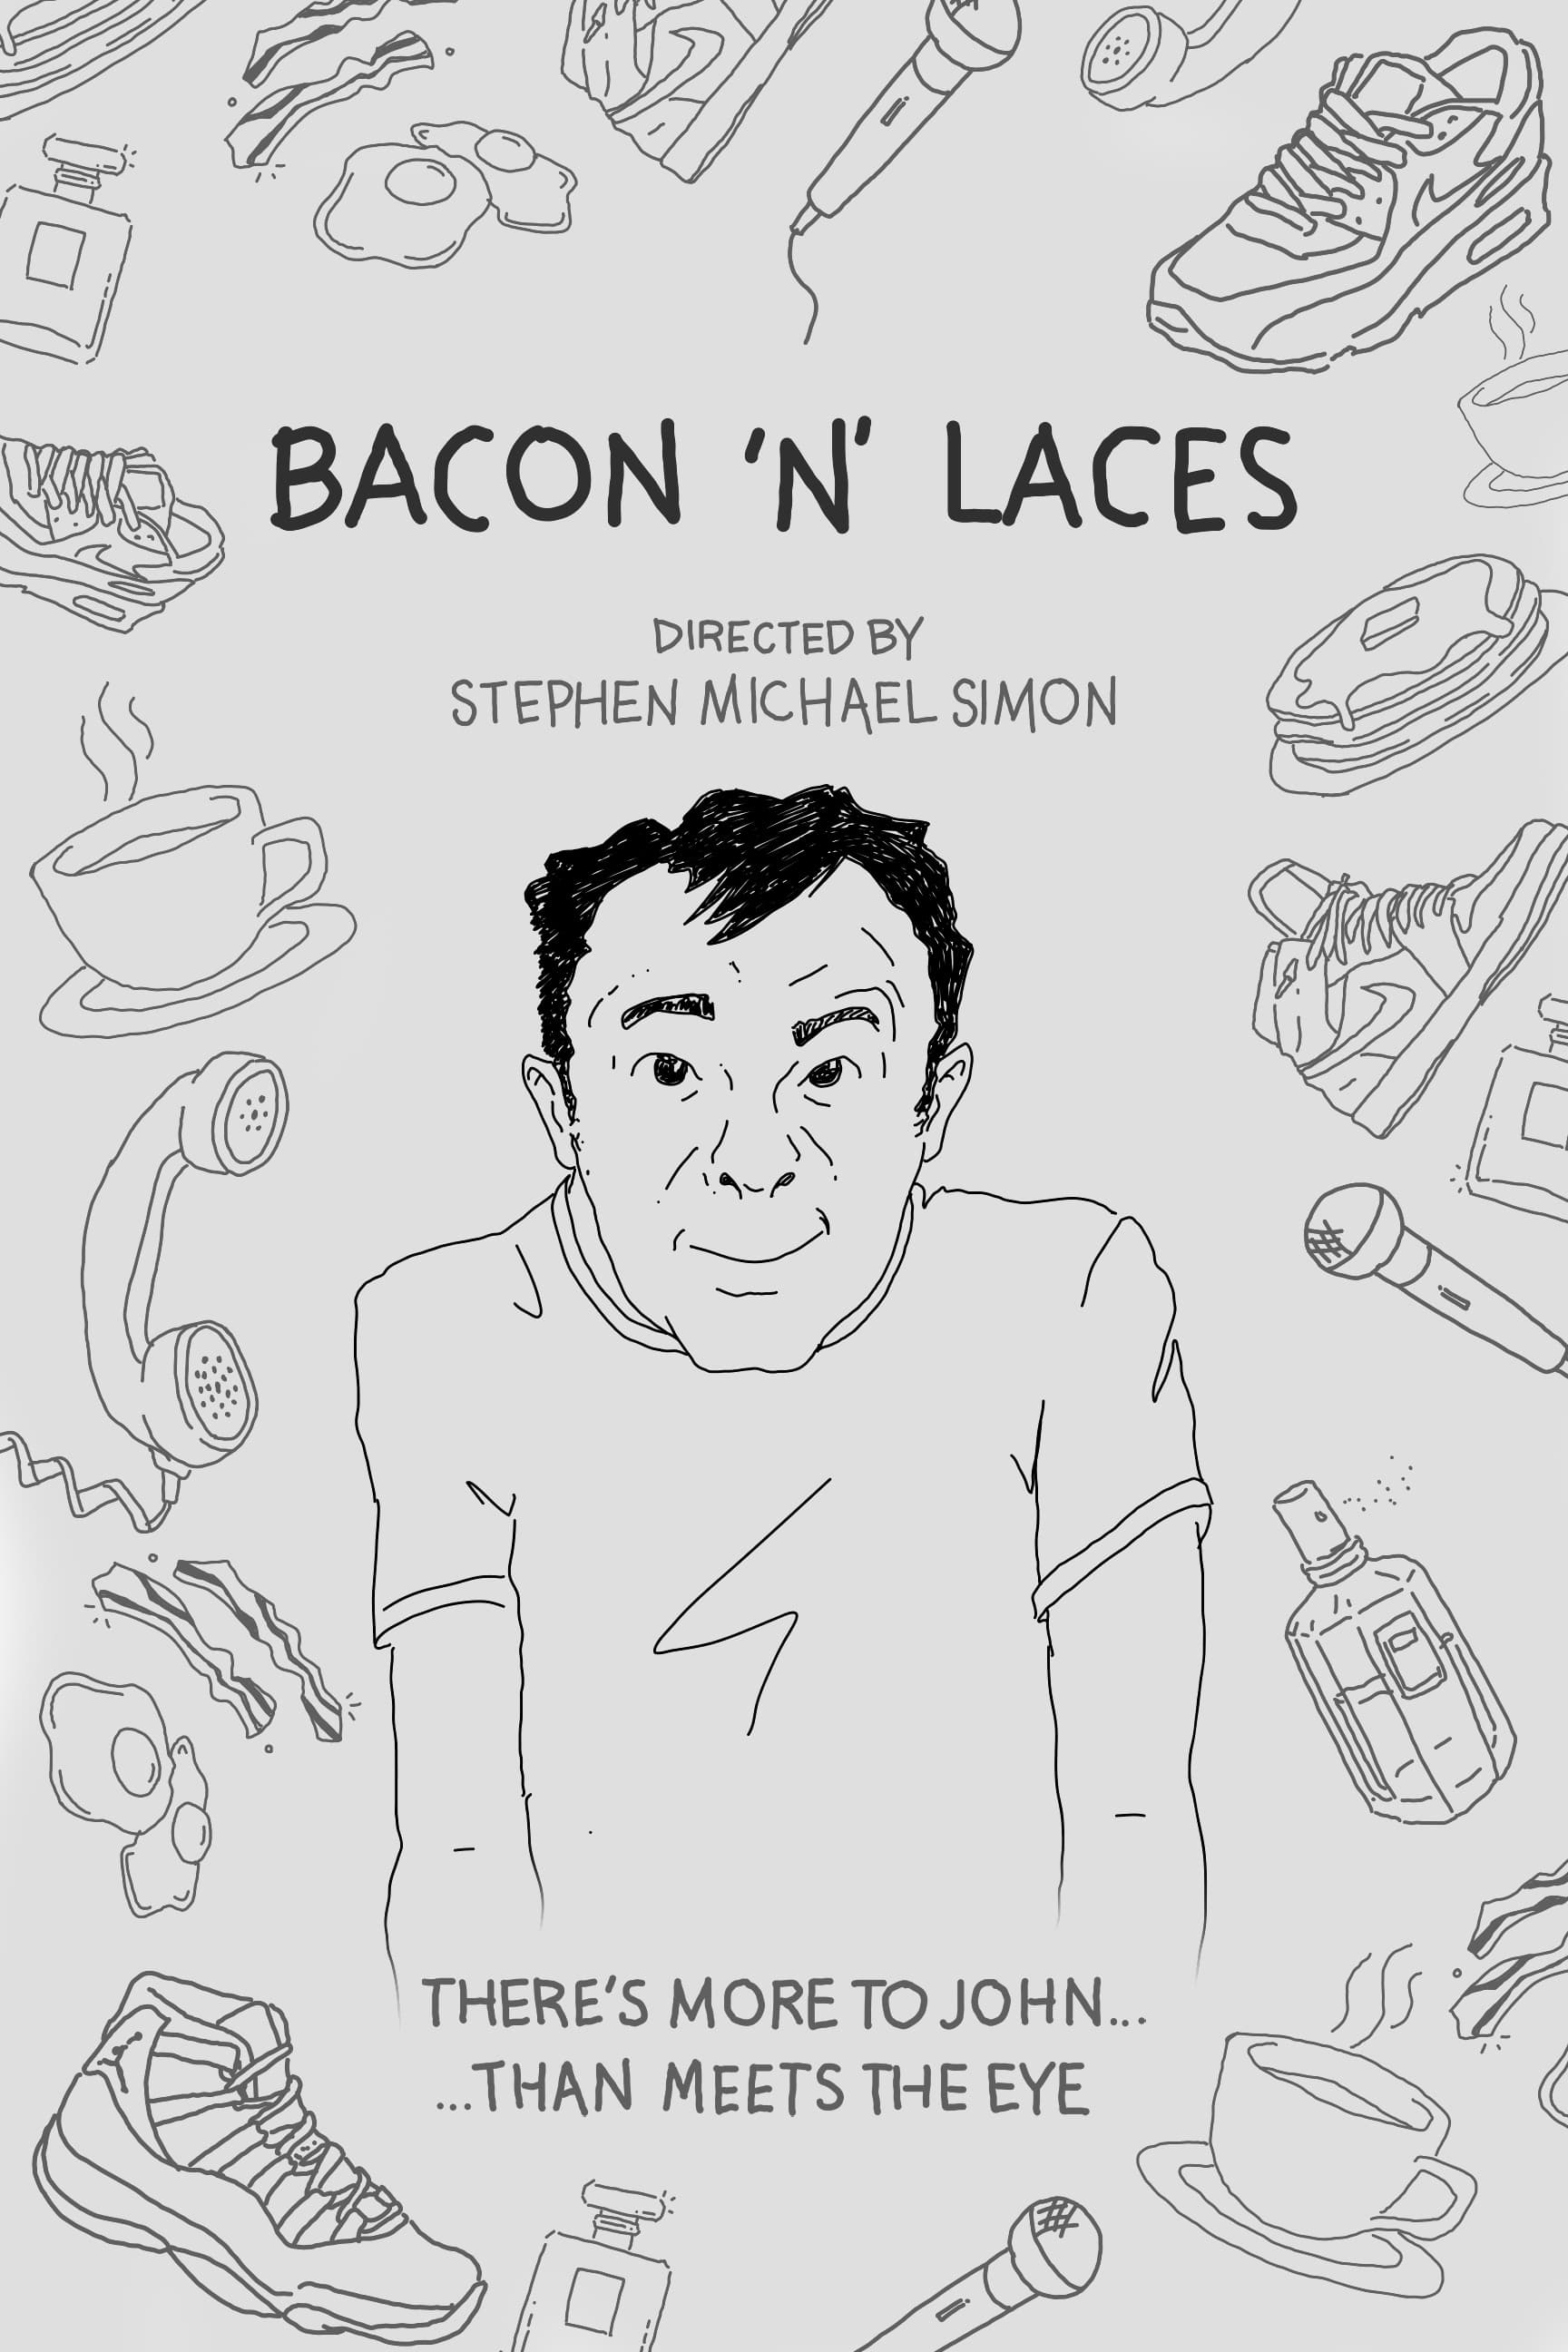 Bacon 'N' Laces